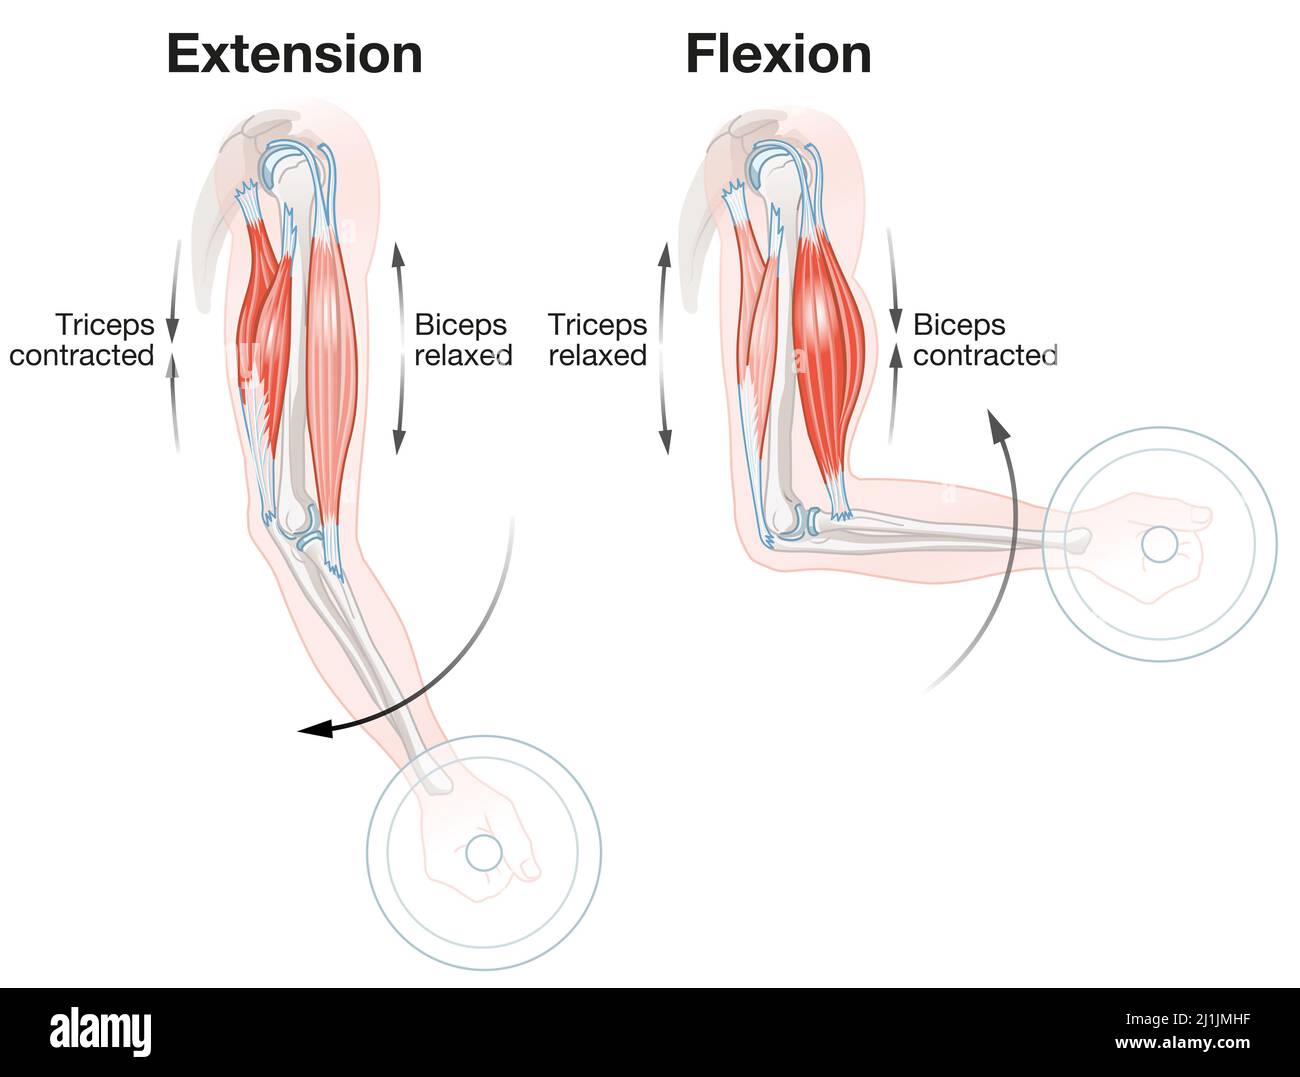 Biceps And Triceps. Extension And Flexion. Labeled Illustration Stock Photo  - Alamy